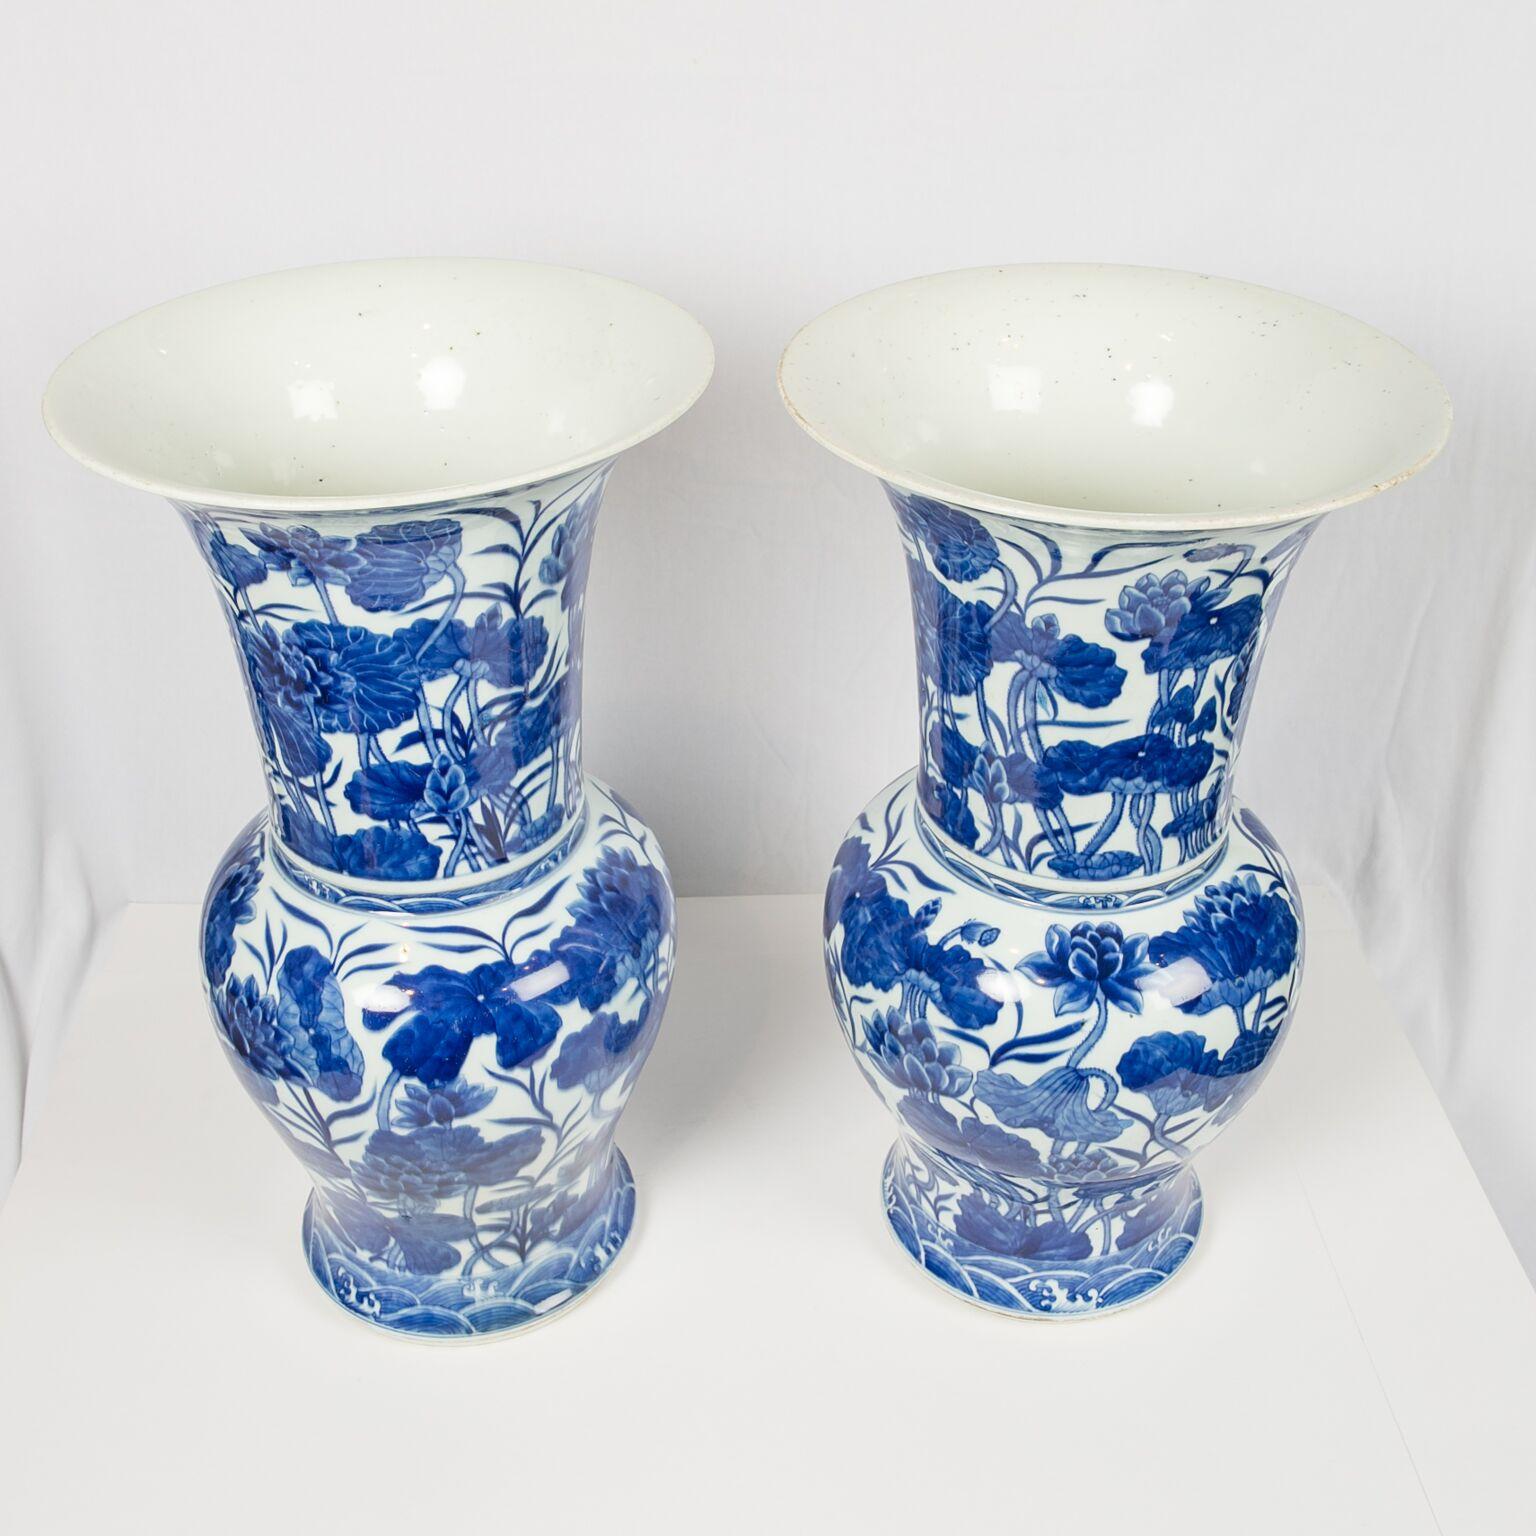 Hand-Painted Pair of Antique Chinese Blue and White Porcelain Vases Qing Dynasty 19th Century